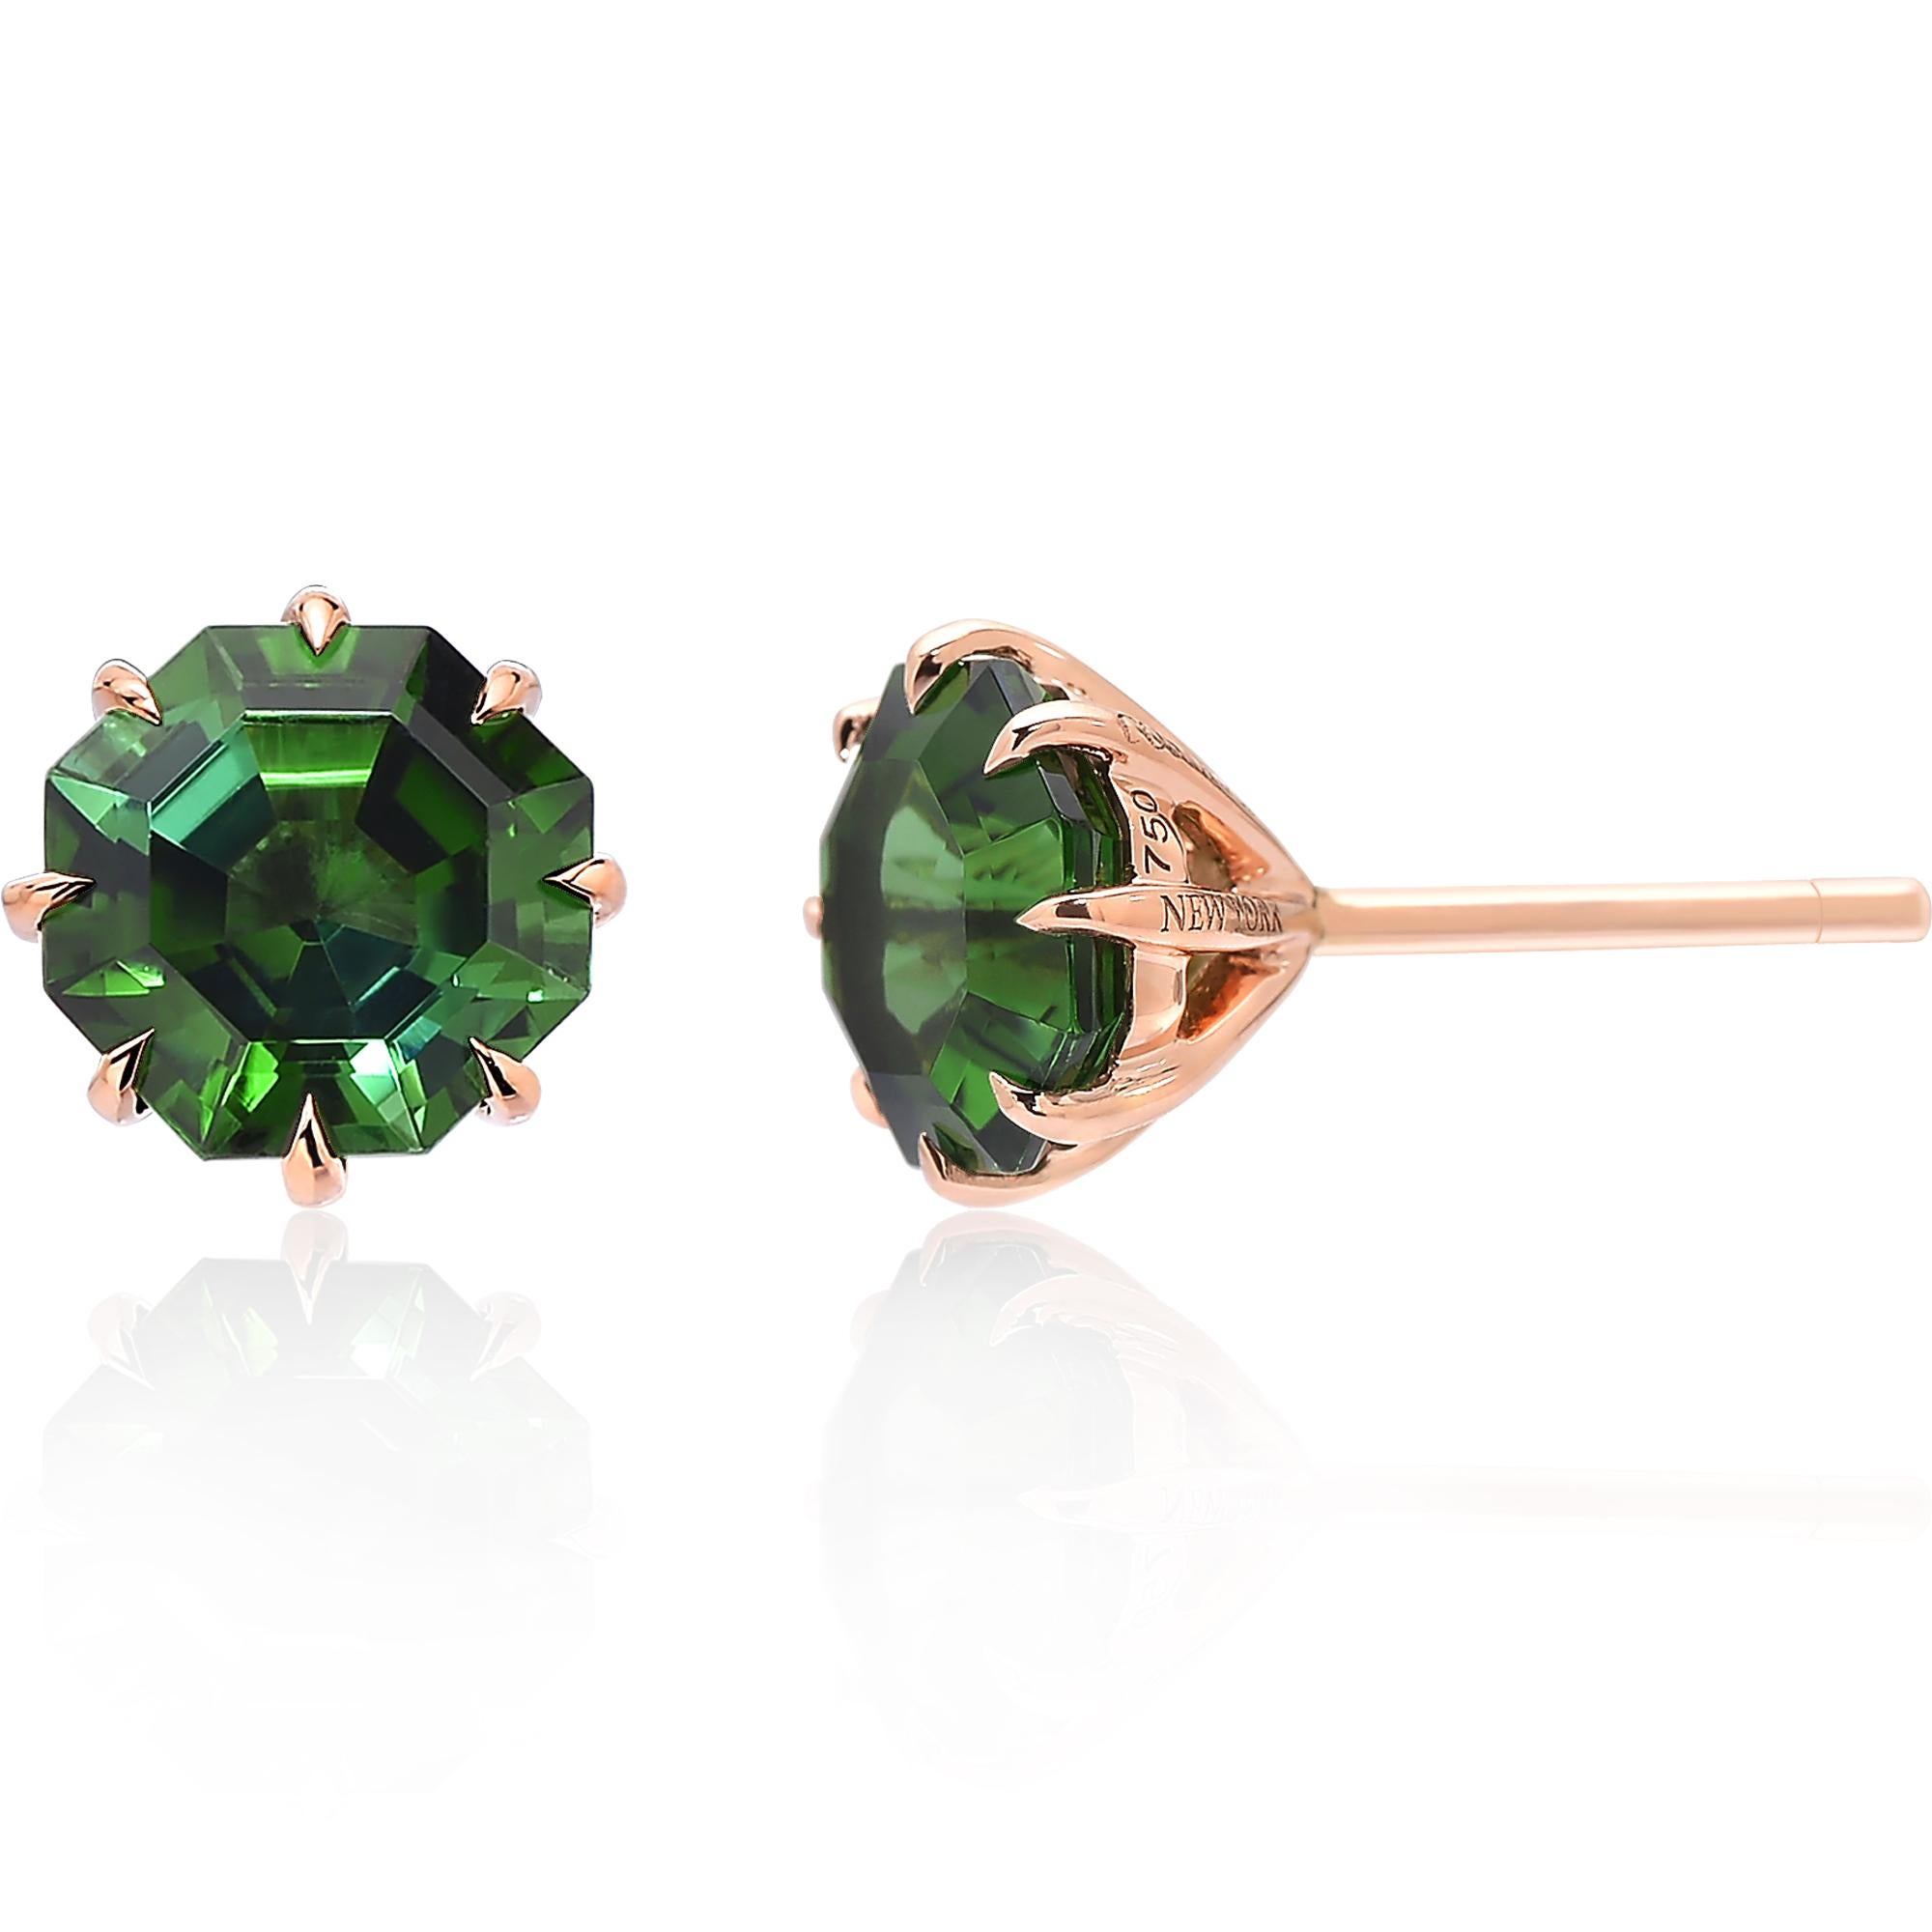 One-of-a-kind hexagonal green tourmaline studs set in 18 karat rose gold. 

A truly unique alternative to a classic pair of diamond studs, these 18 karat rose gold studs are certainly a great addition to anyone's jewelry collection. 

The precision